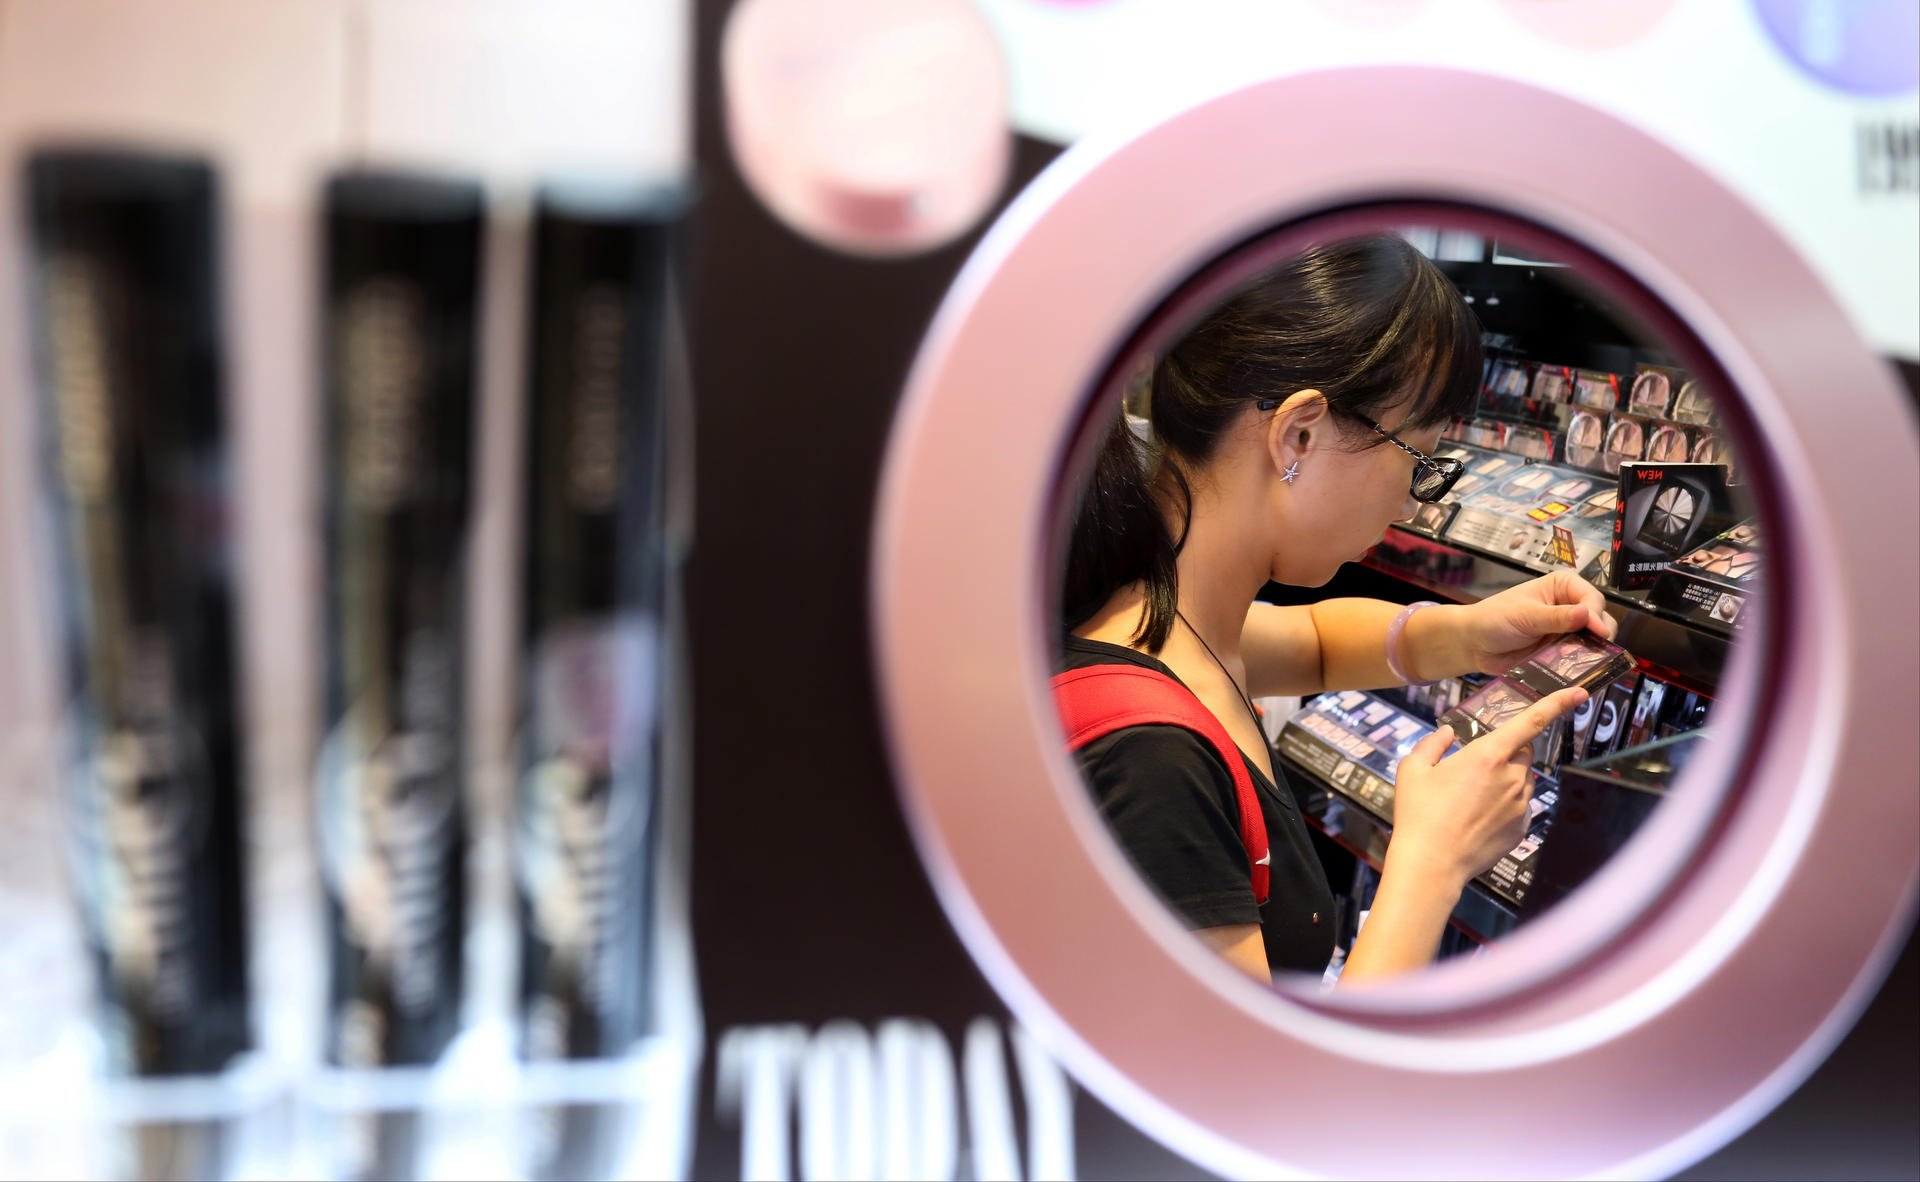 A young woman checks out some eye shadows at a Causeway Bay store yesterday, but packaging offers few clues as to whether a product was tested on animals. Photo: Nora Tam